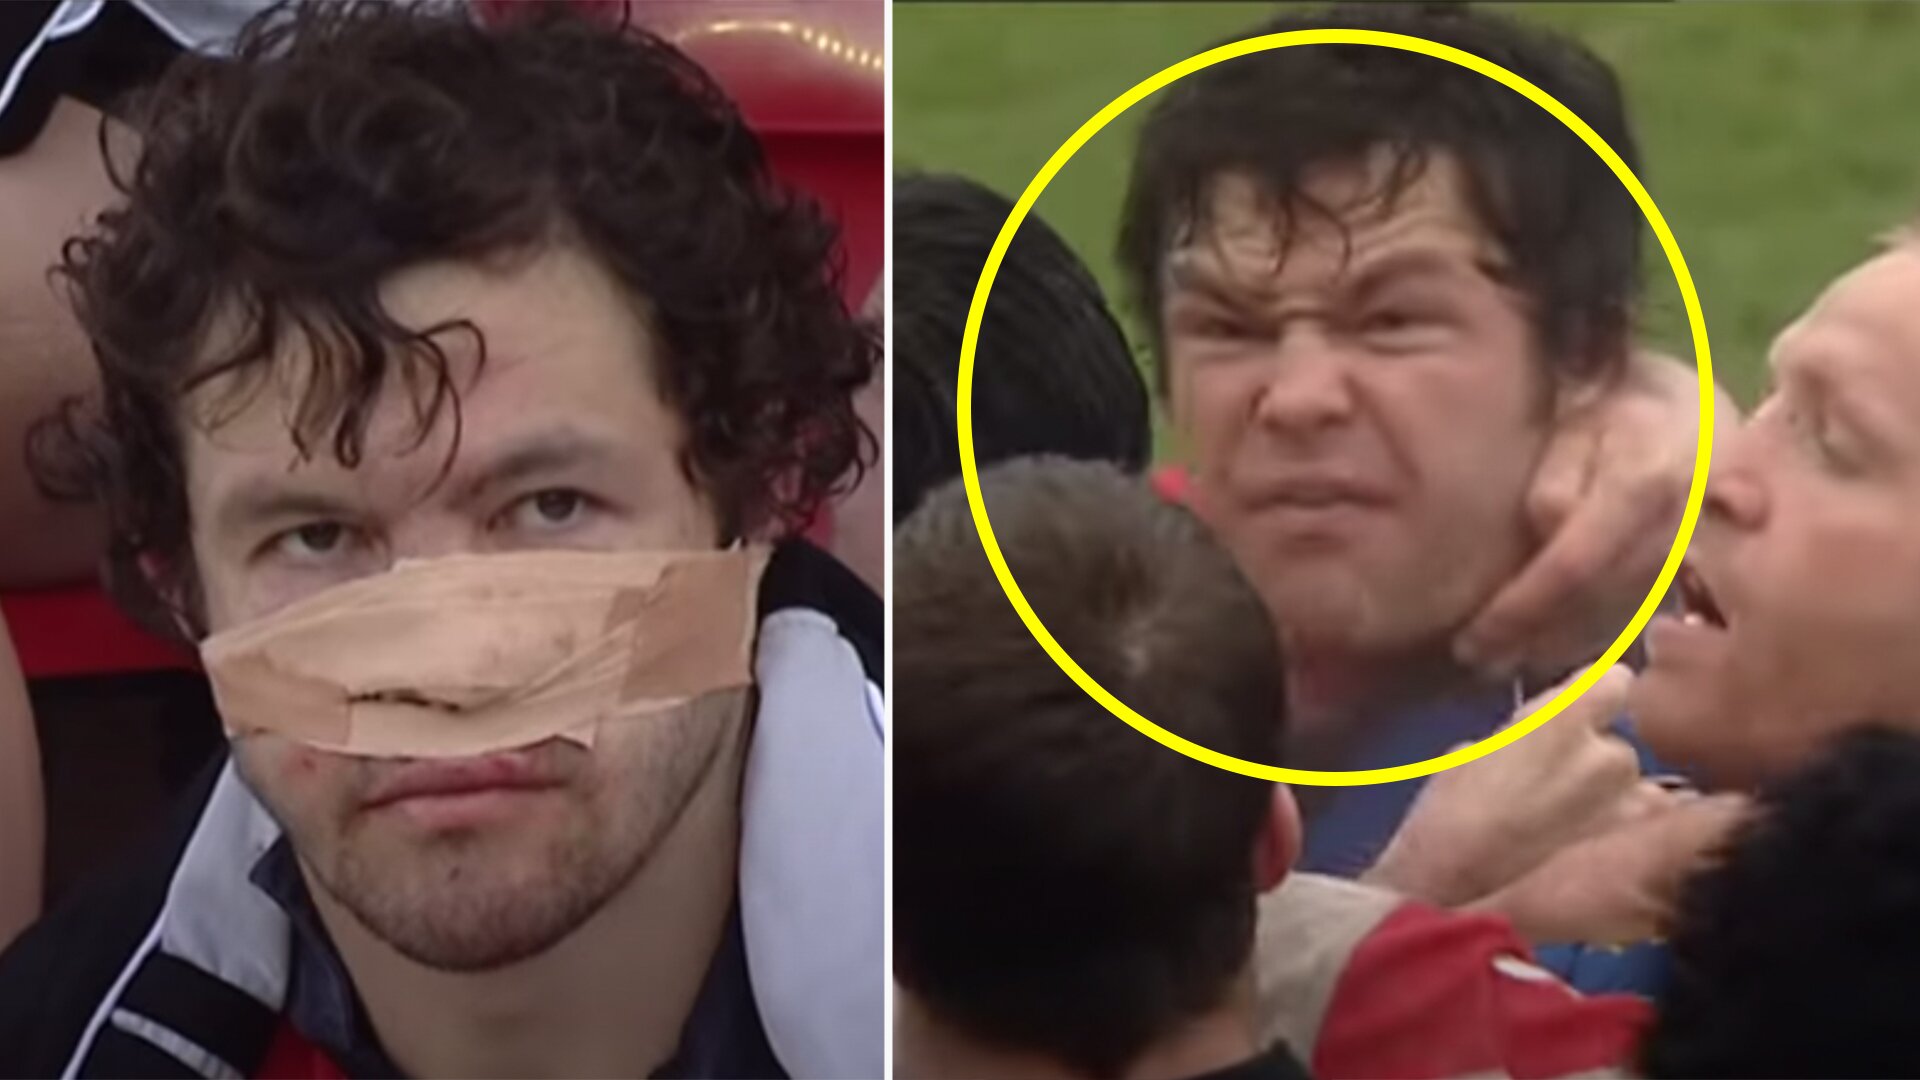 Owen Farrell's dad was an absolute savage in Rugby League - New video reveals